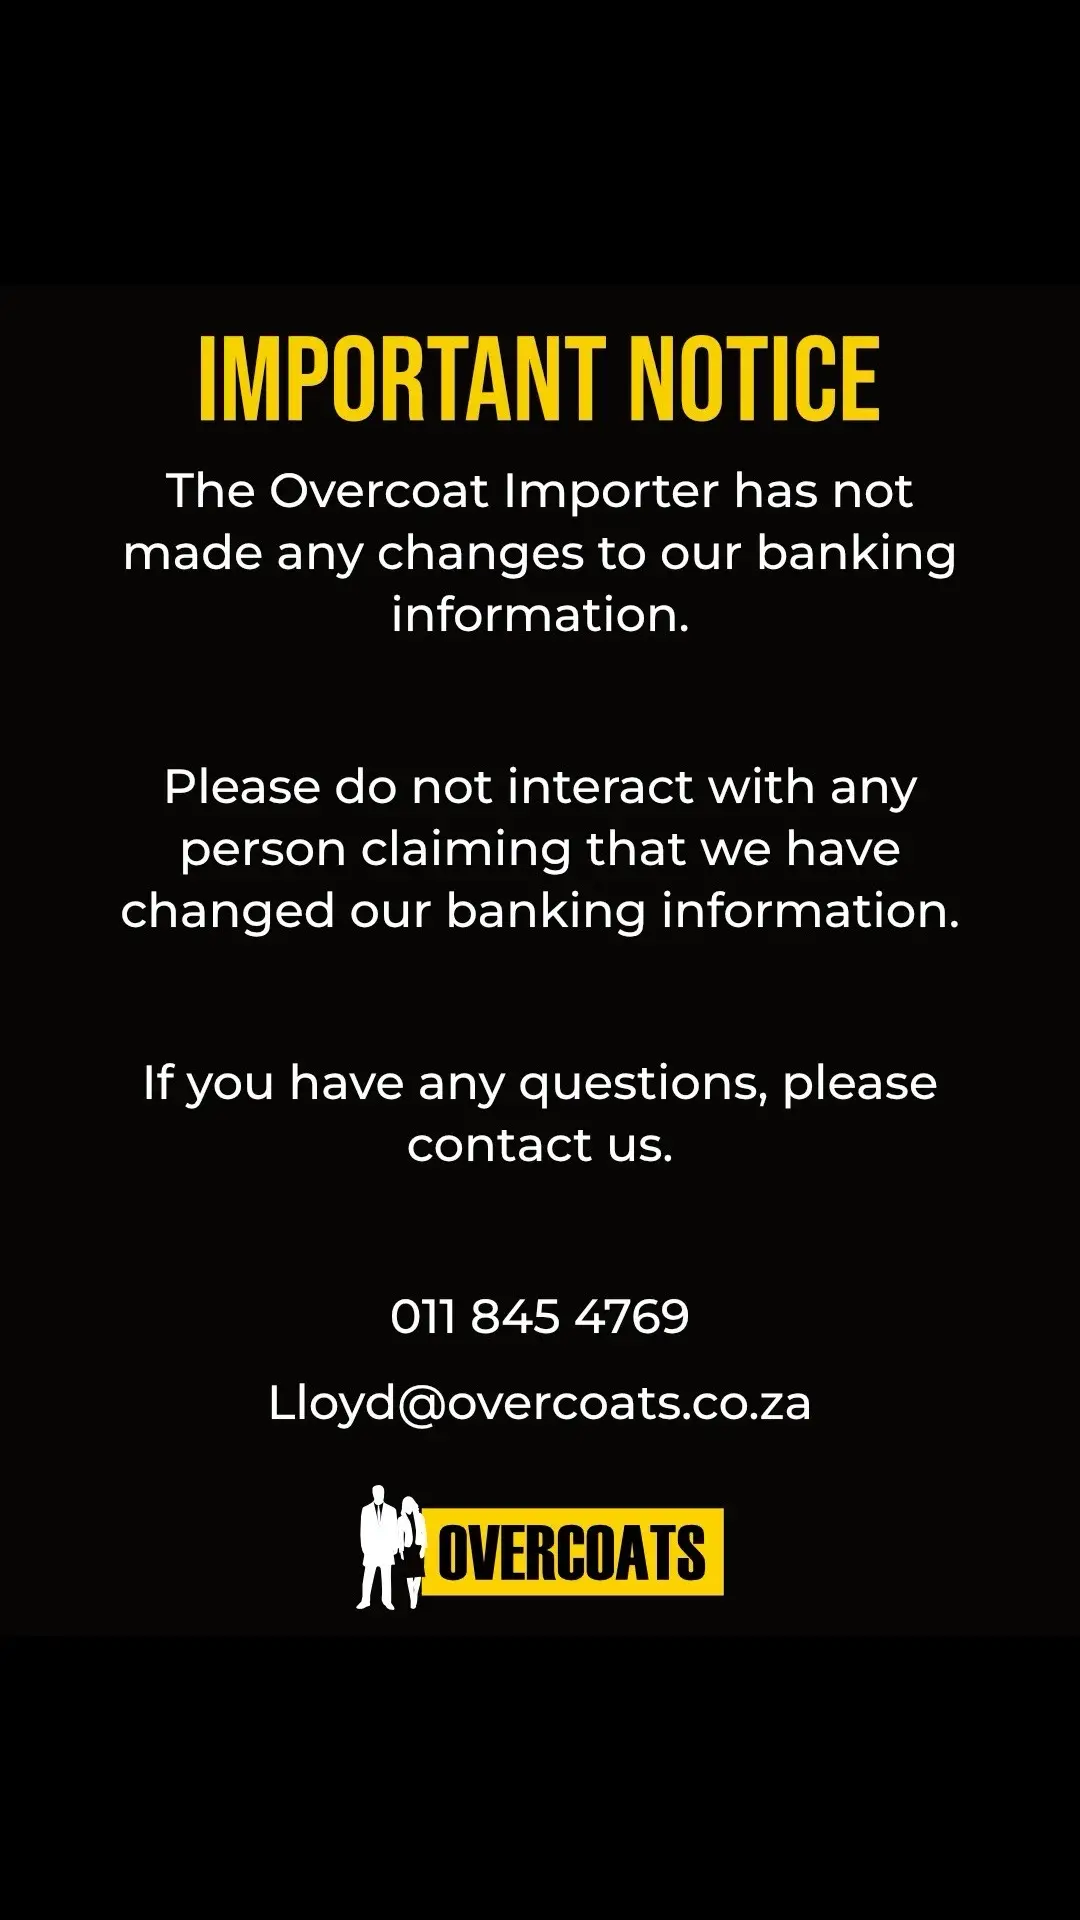 Important notice: The Overcoat Importer has not made any changes to our banking information. Please do not interact with any person claiming that we have changed our banking information. If you have any questions, please contact us.